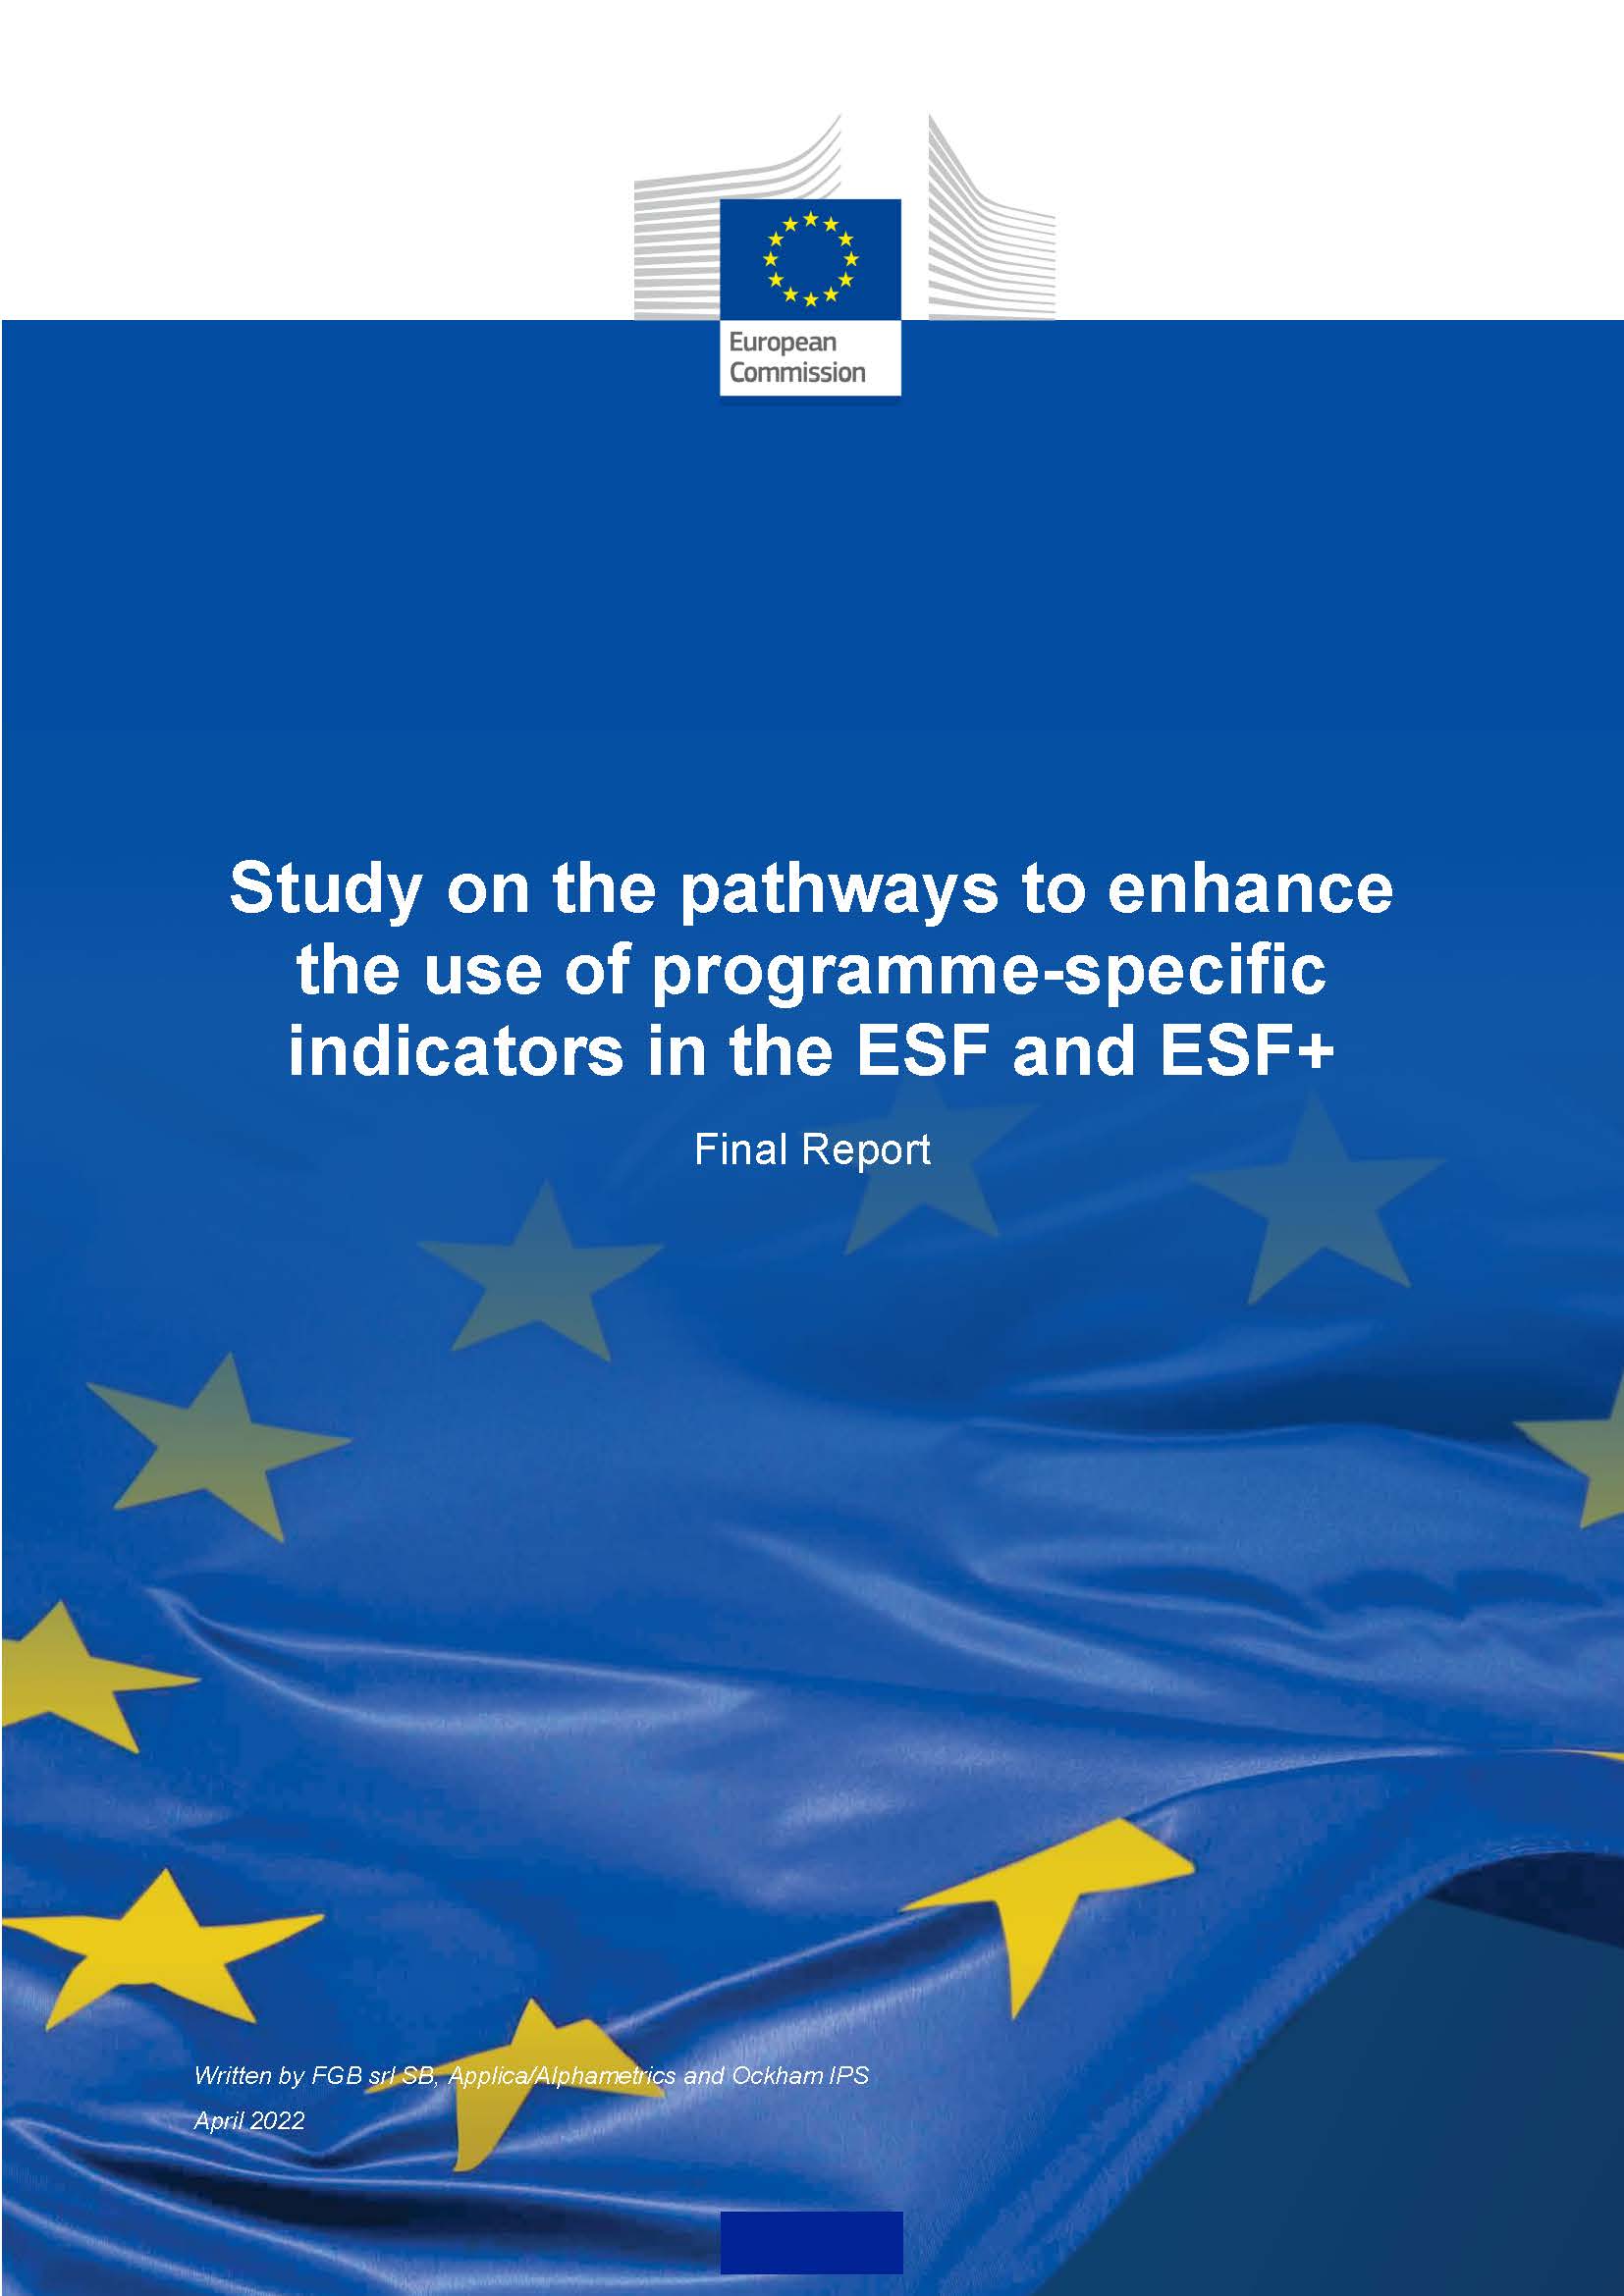 Study on the pathways to enhance the use of programme-specific indicators in the ESF and ESF+